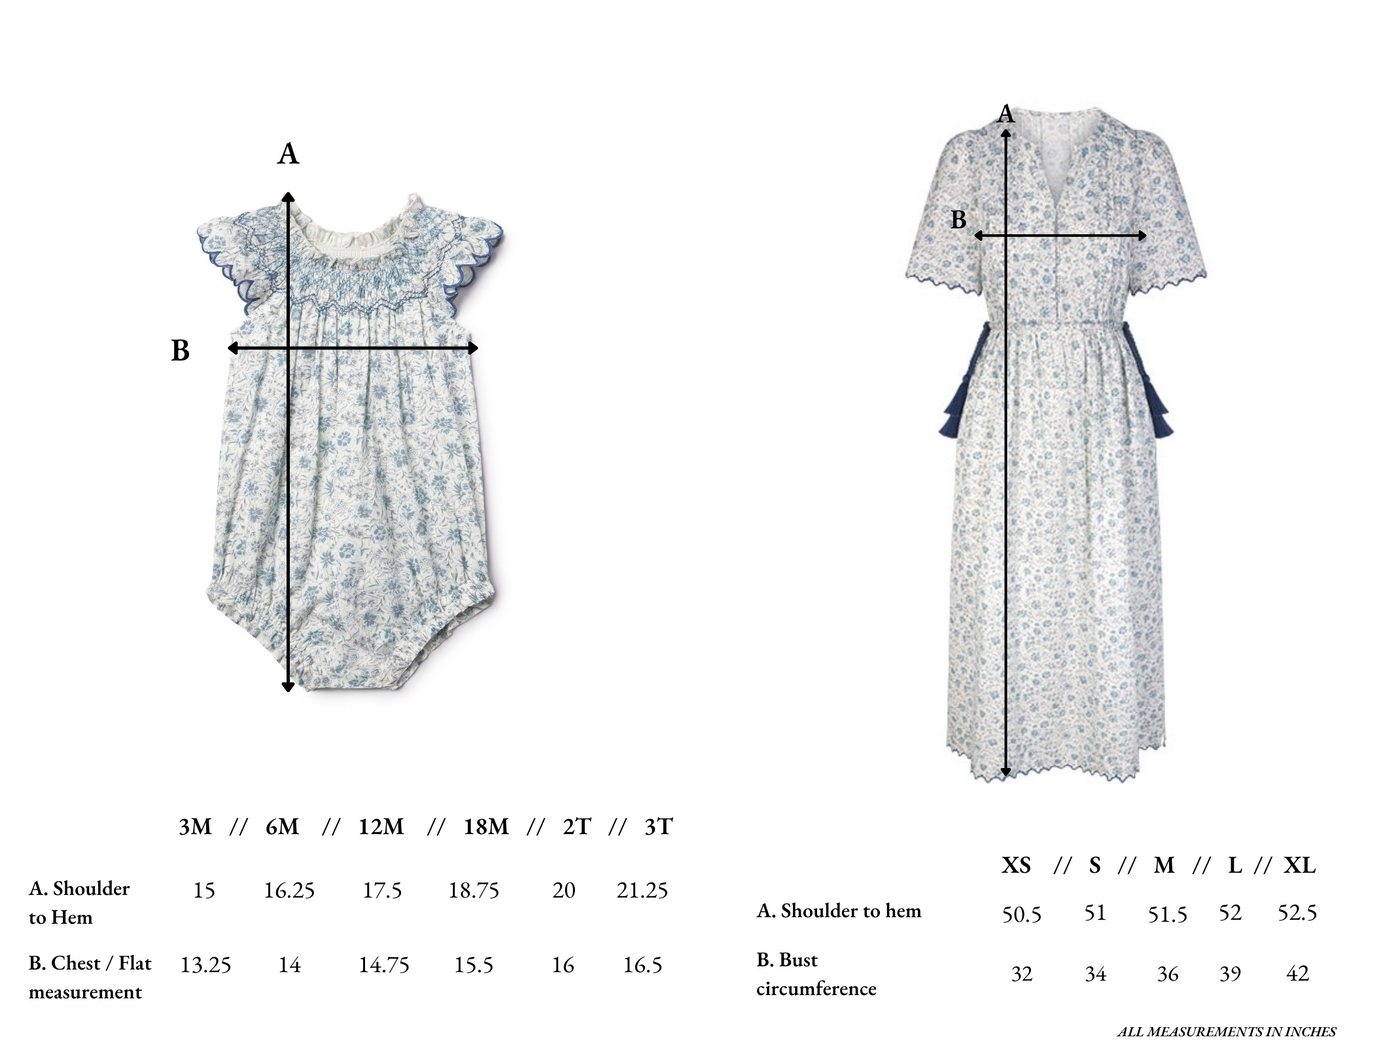 Floral Blues Mother & Baby Set